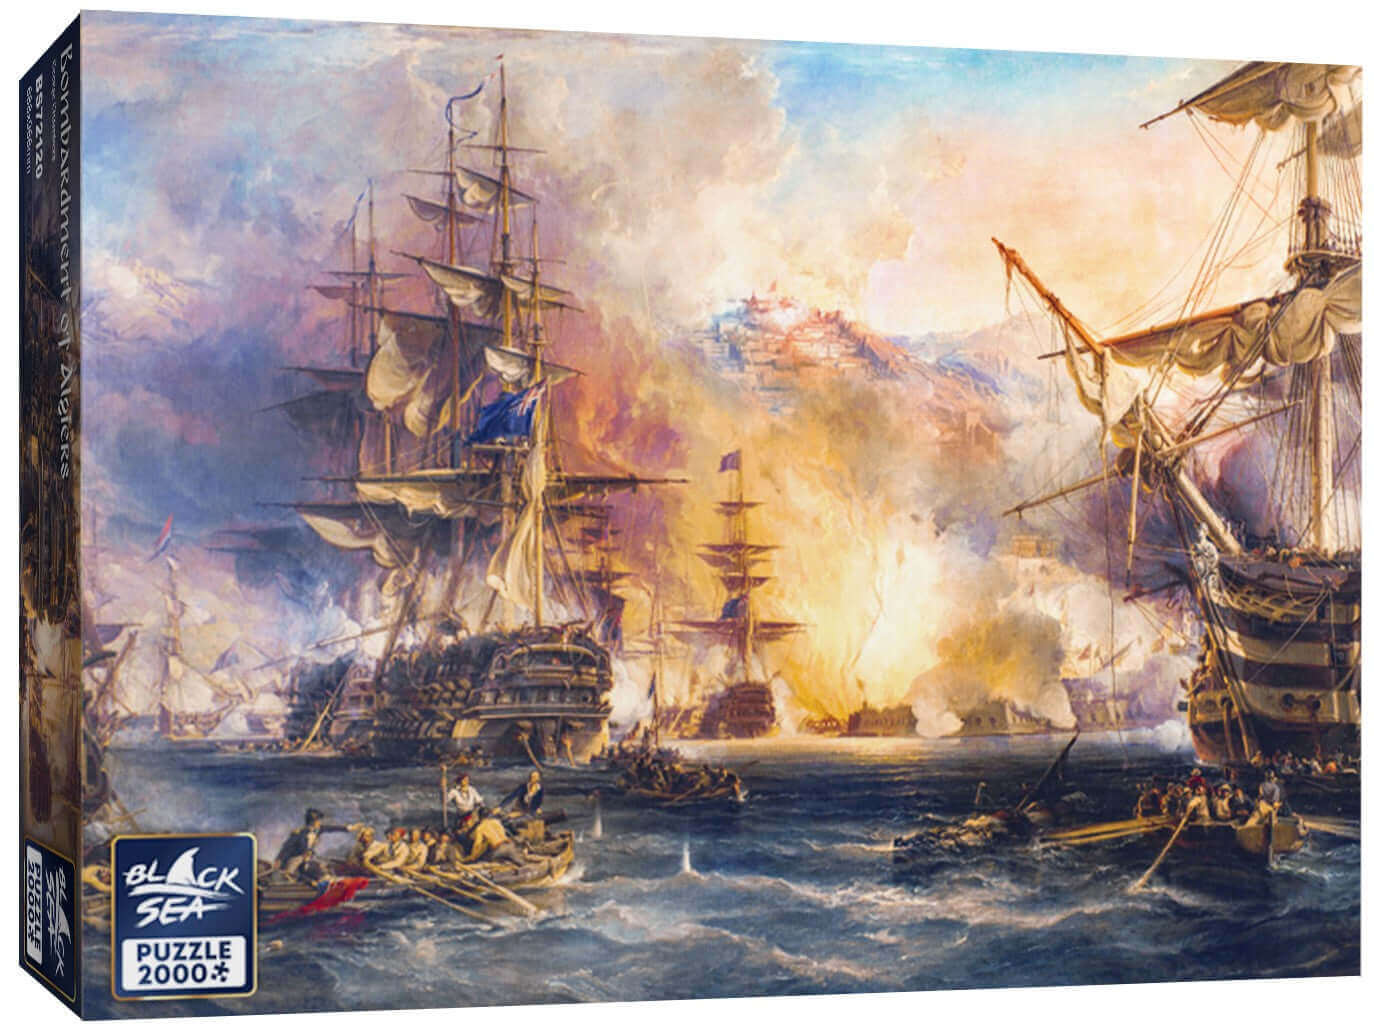 Puzzle Black Sea 2000 pieces - Bombardment of Algiers, Sometimes the cost of justice is enormous - thousands of victims fall in her name and there have been many bloody and devastating battles. The painting of George Chambers shows a battle in the name of